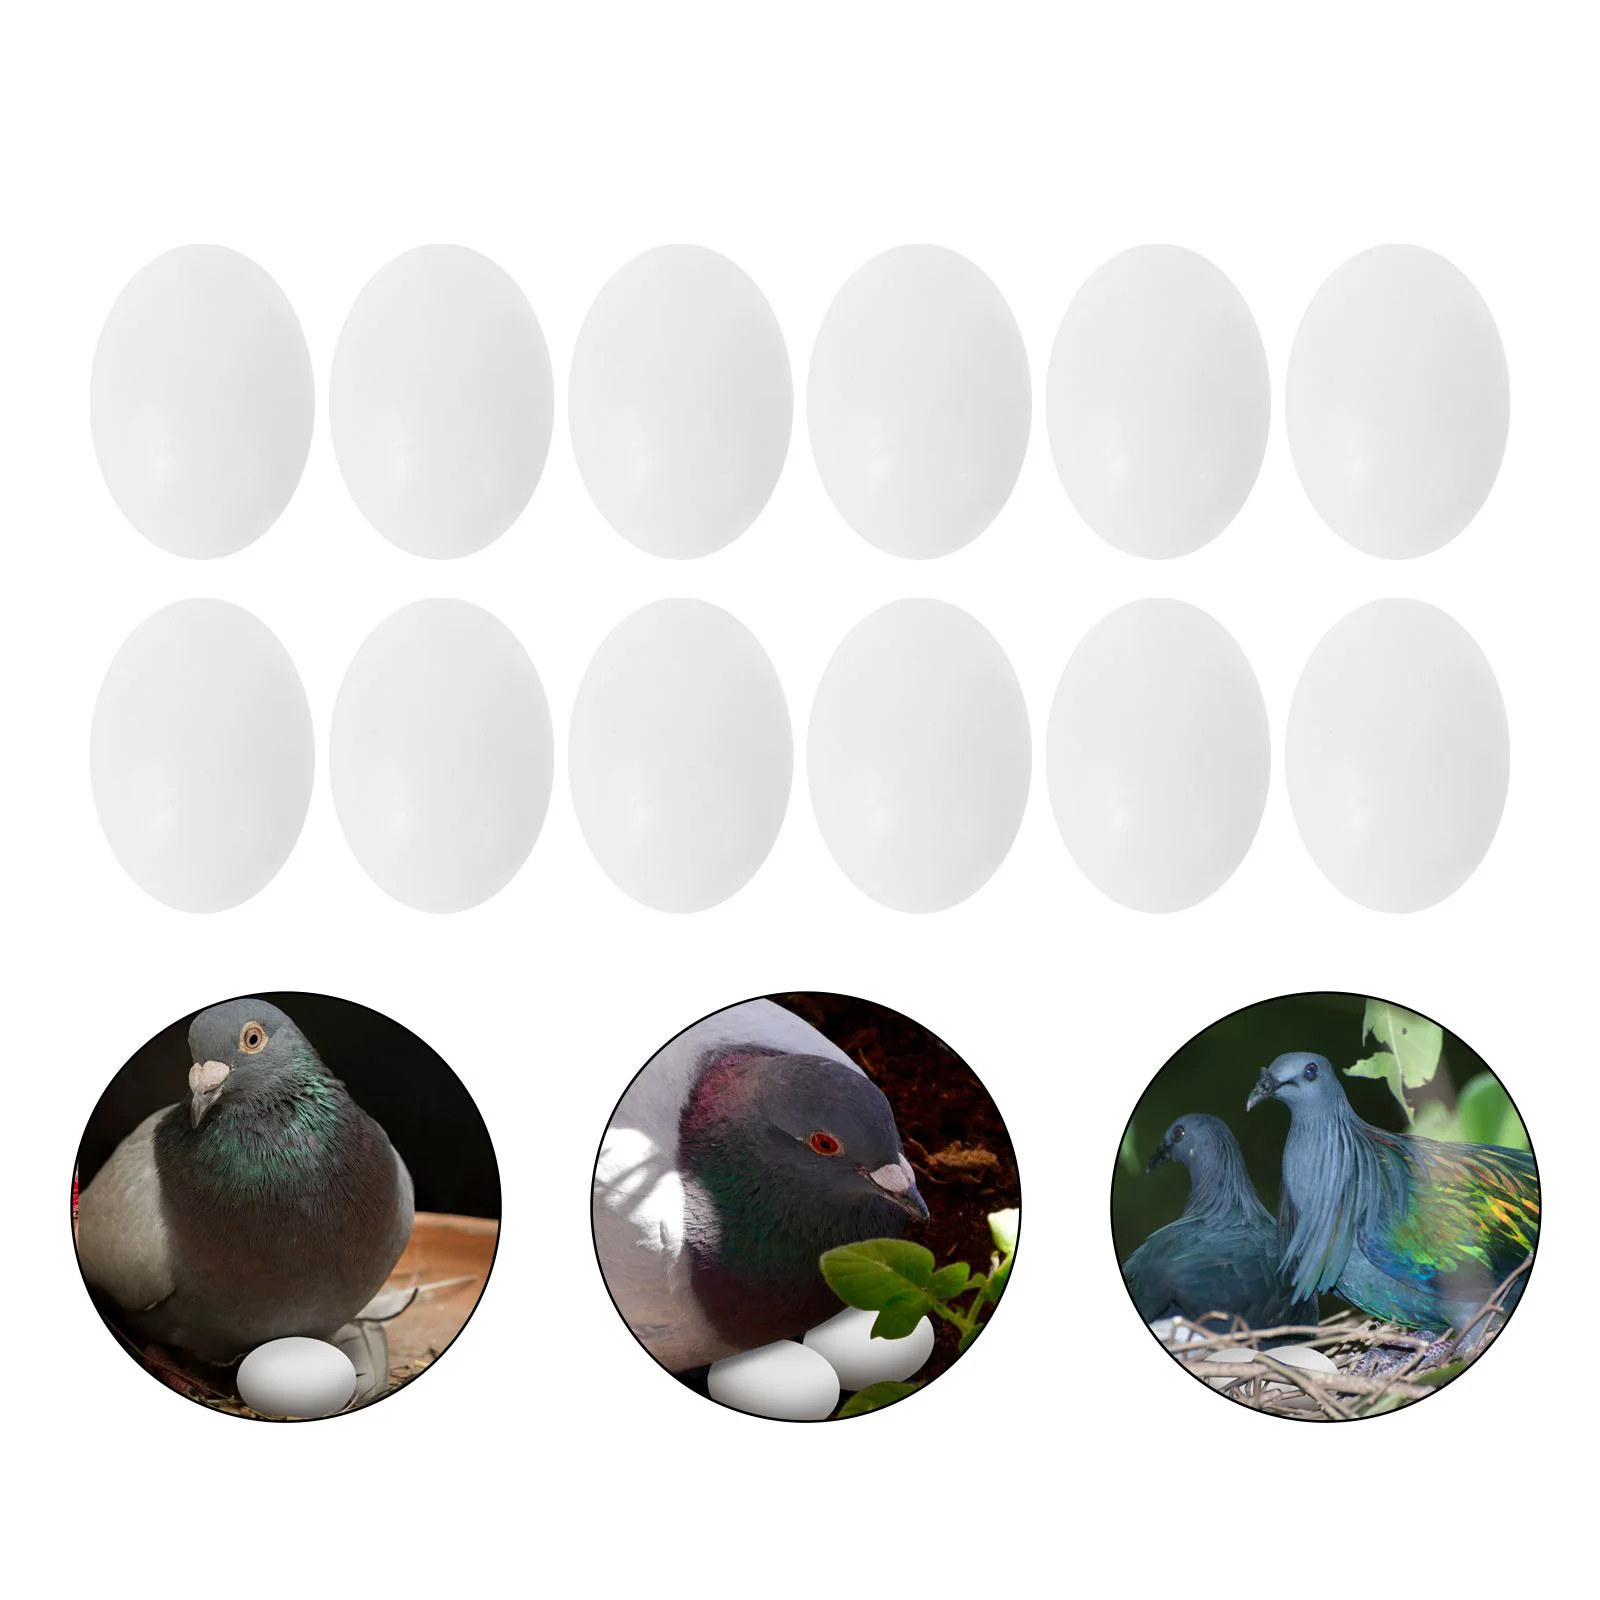 

30Pcs Parrot Eggs Hatching Eggs Realistic White Toy For Kidss Replacement for Trick The Birds to Stop Laying Eggs Painting Craft